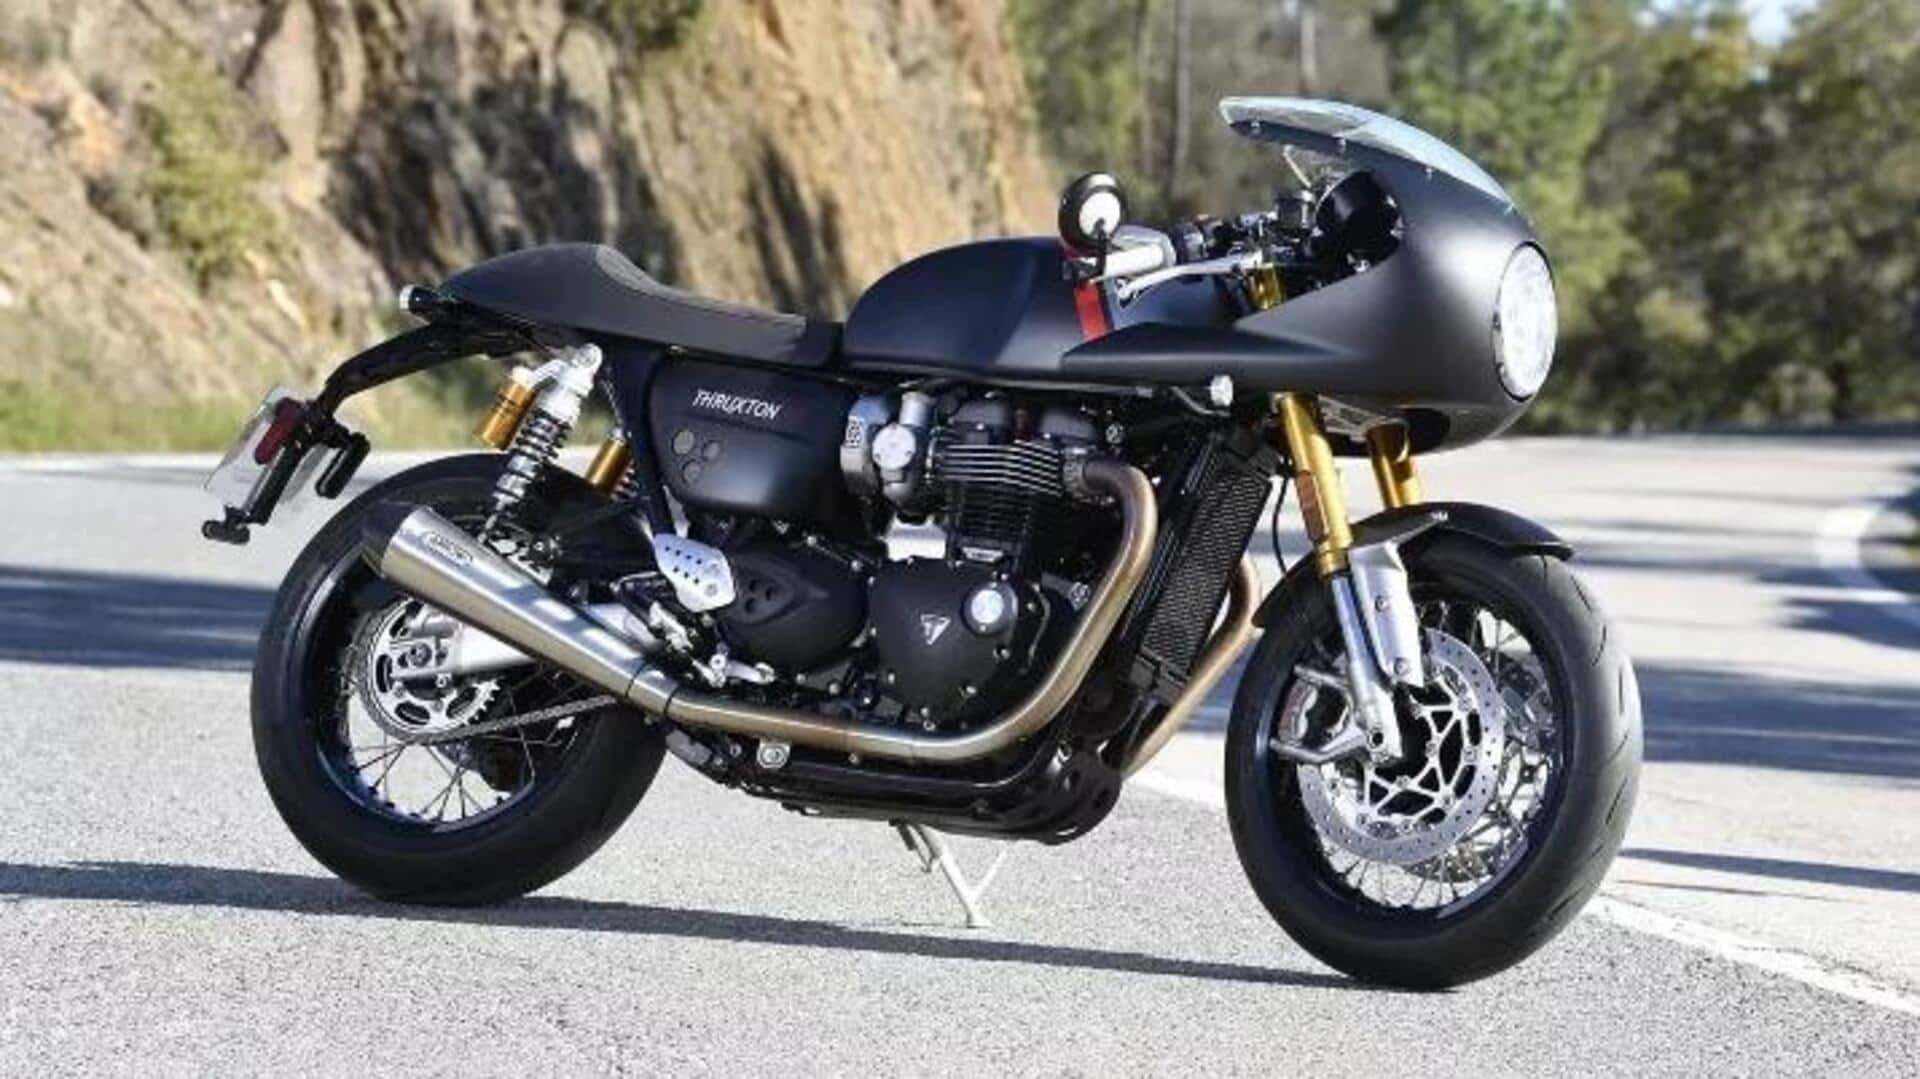 All-new Triumph Thruxton 400 spotted testing: What to expect